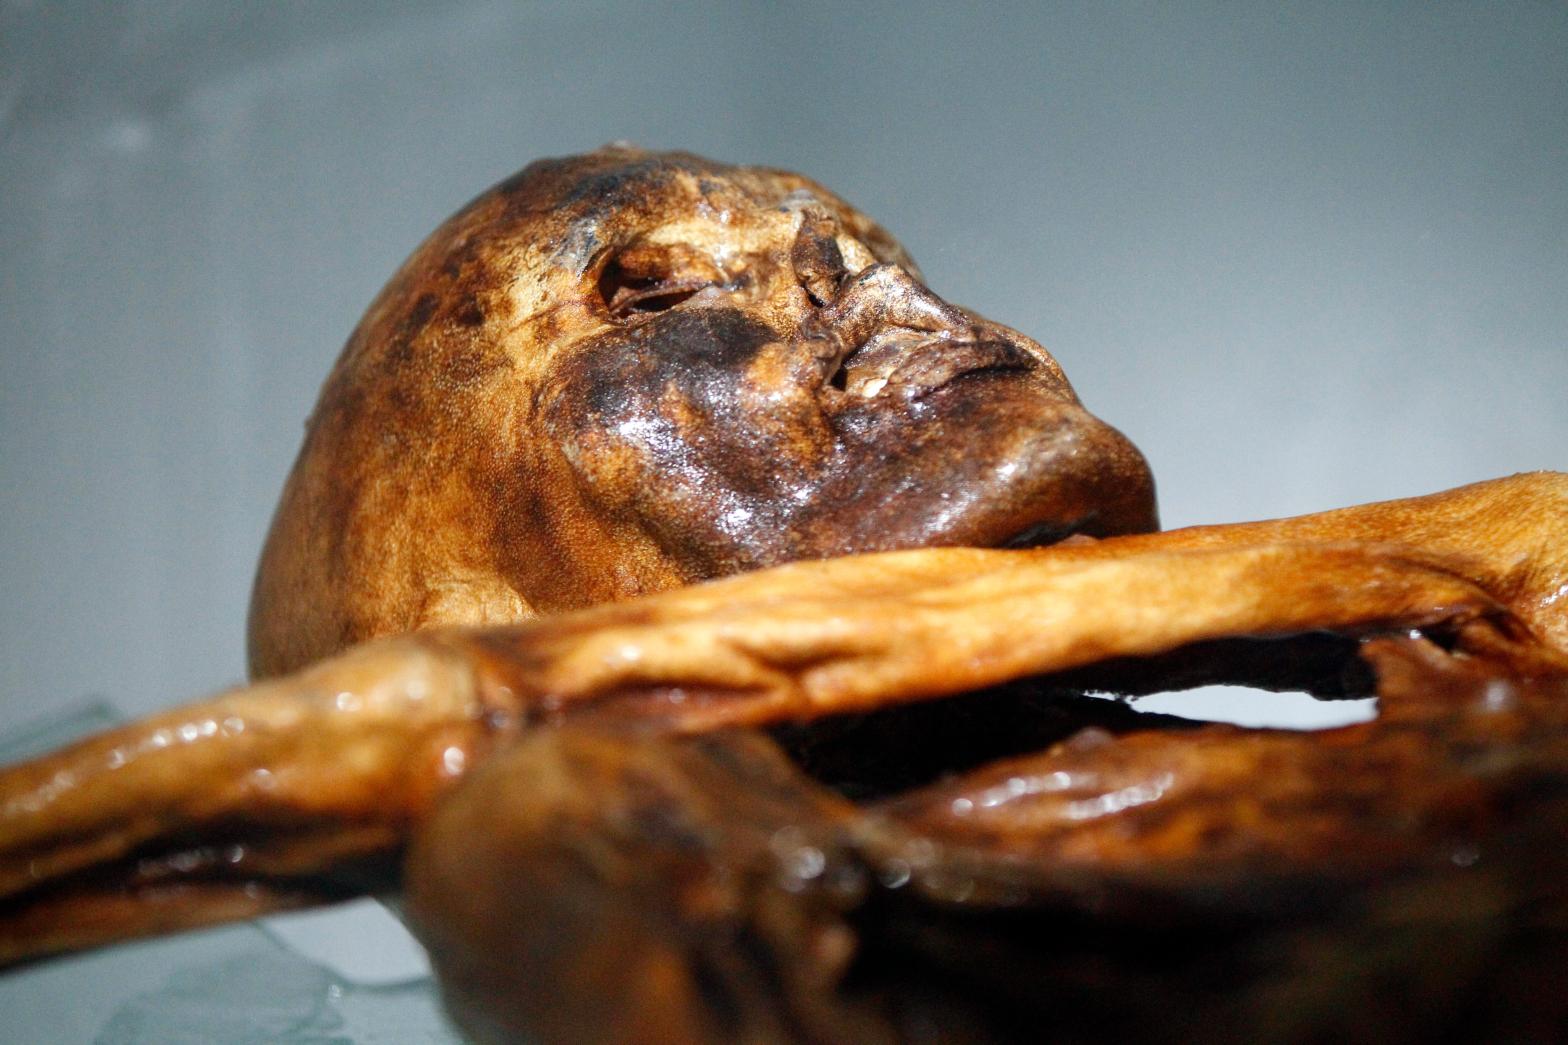 Ötzi, a 5,300-year-old mummy discovered in 1991. (Photo: Andrea Solero/AFP, Getty Images)